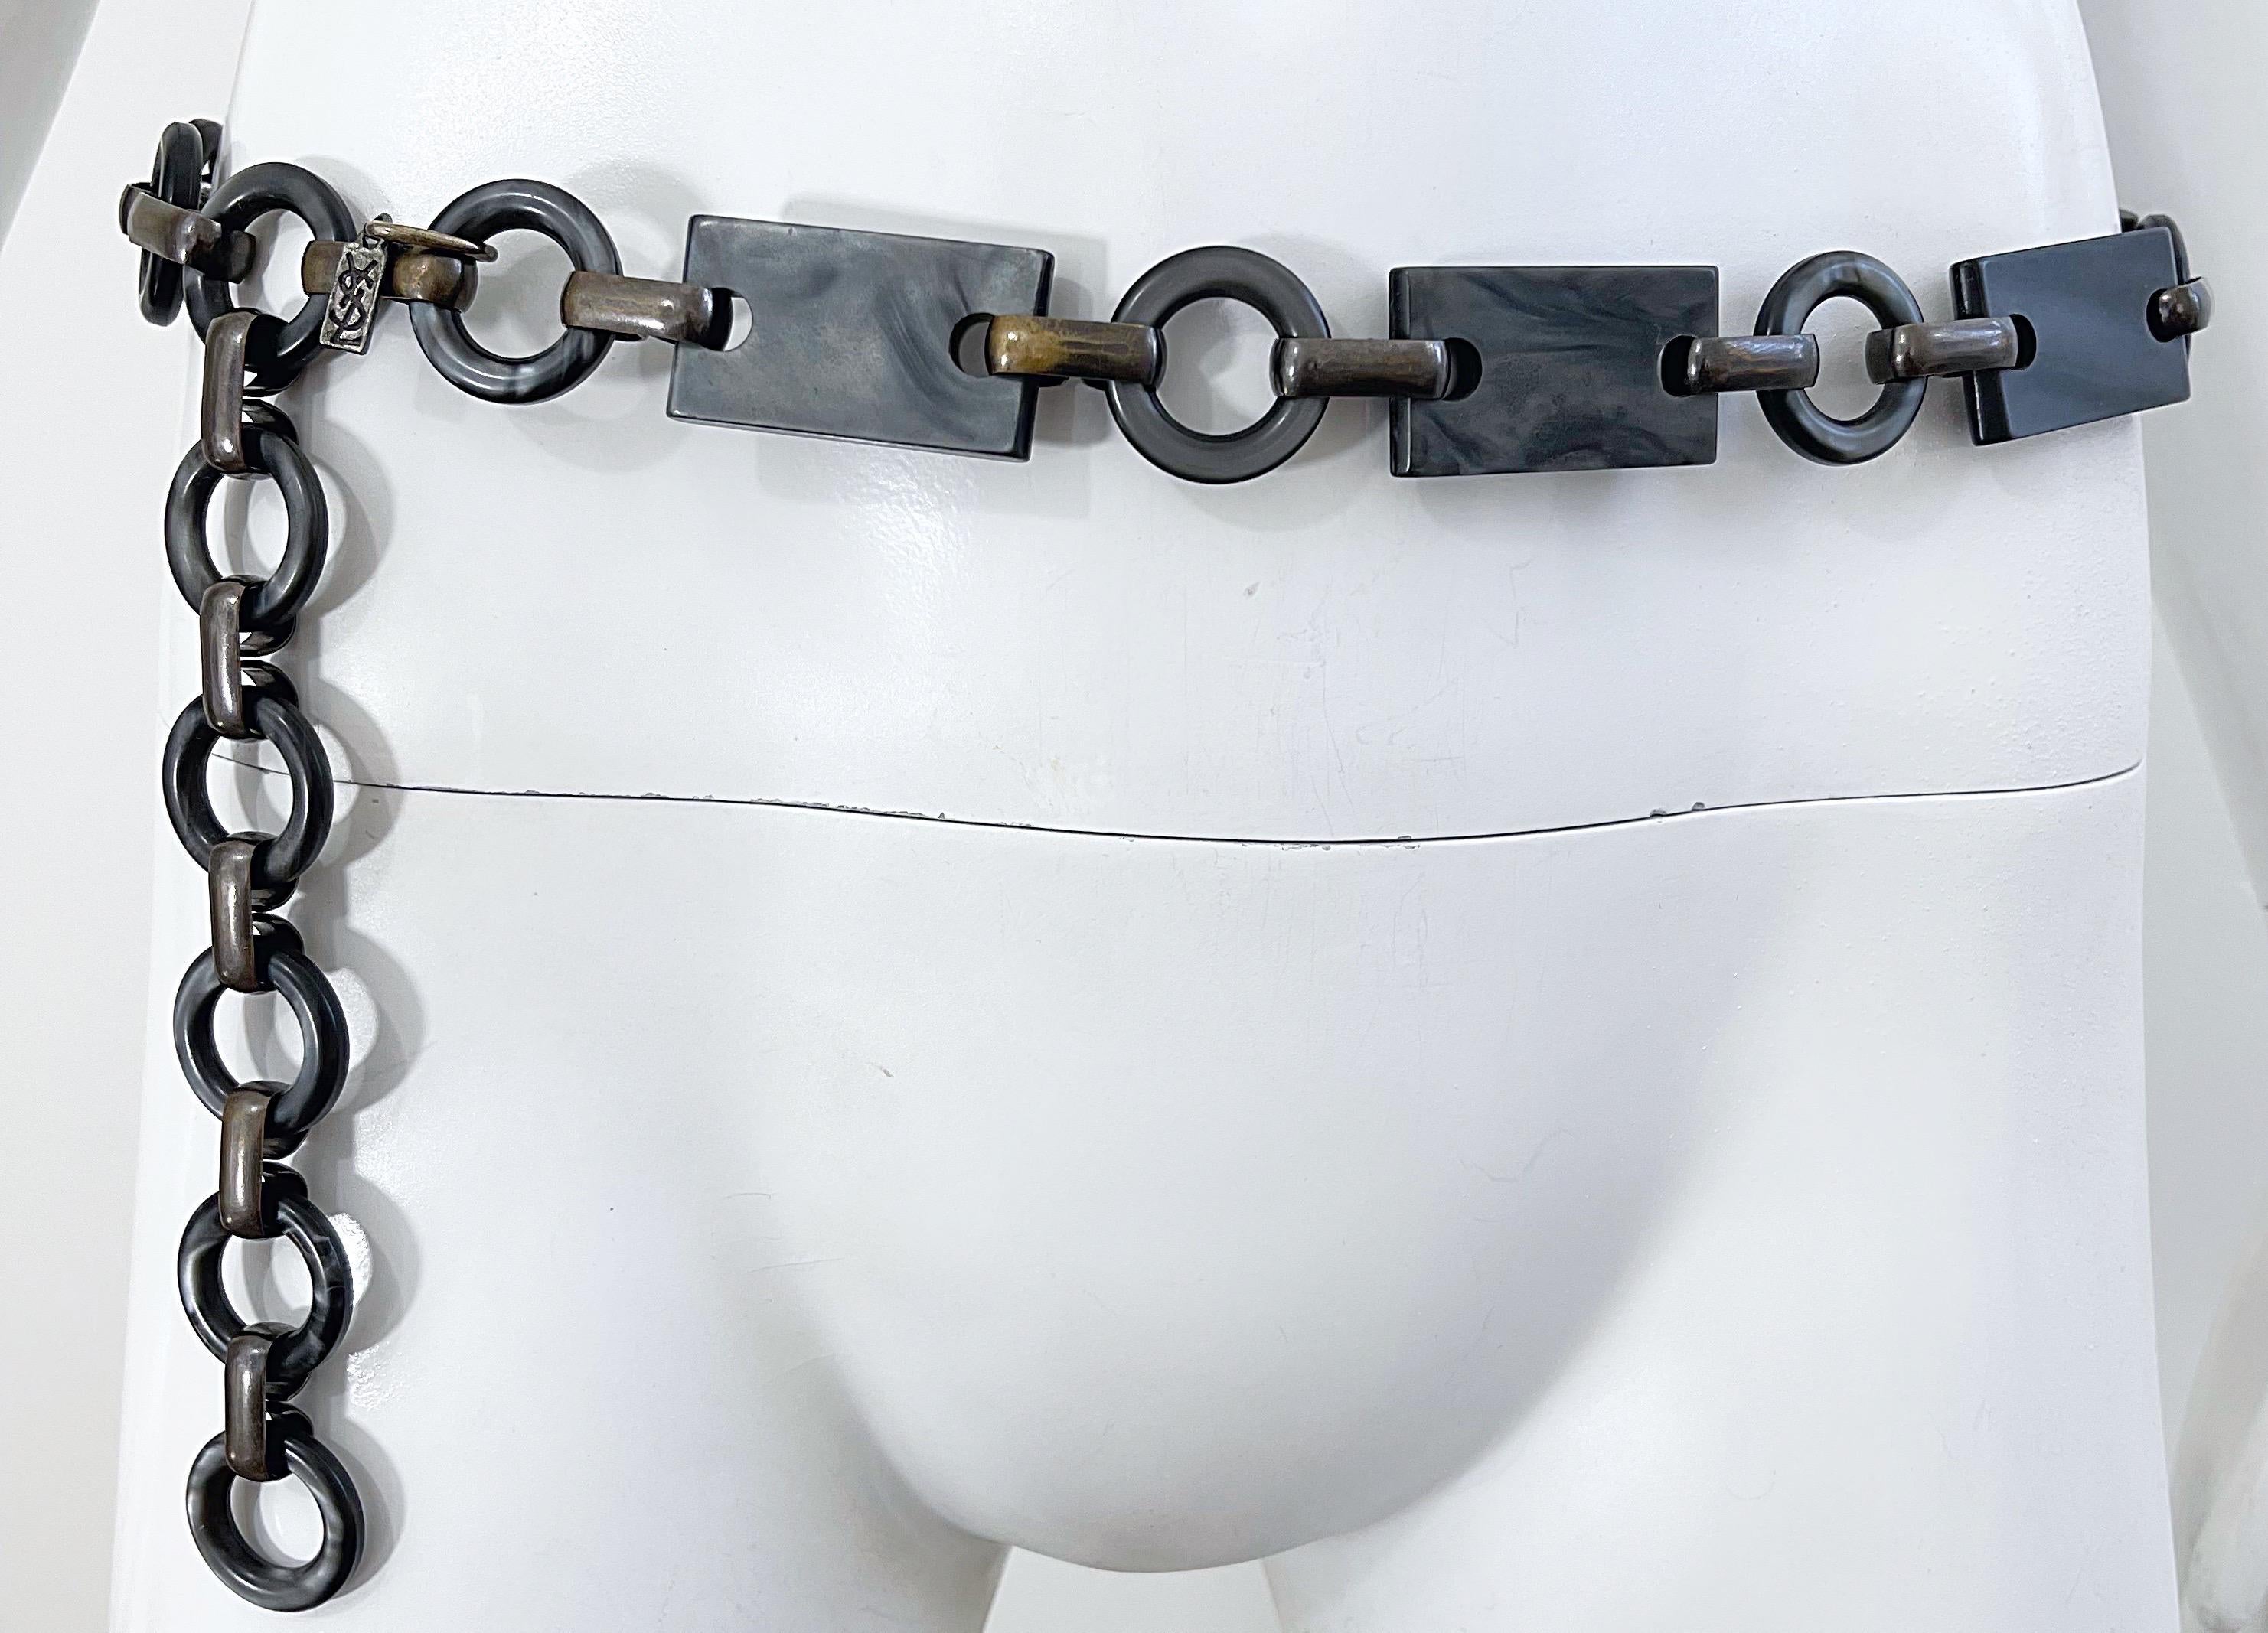 Fabulous 1970s YVES SAINT LAURENT gray / gunmetal marbled lucite chain link belt or necklace ! Signature YSL logo on attached silver metal plate. Features a slight iridescent sheen, especially in the right light. Dress up or down as a belt or as a